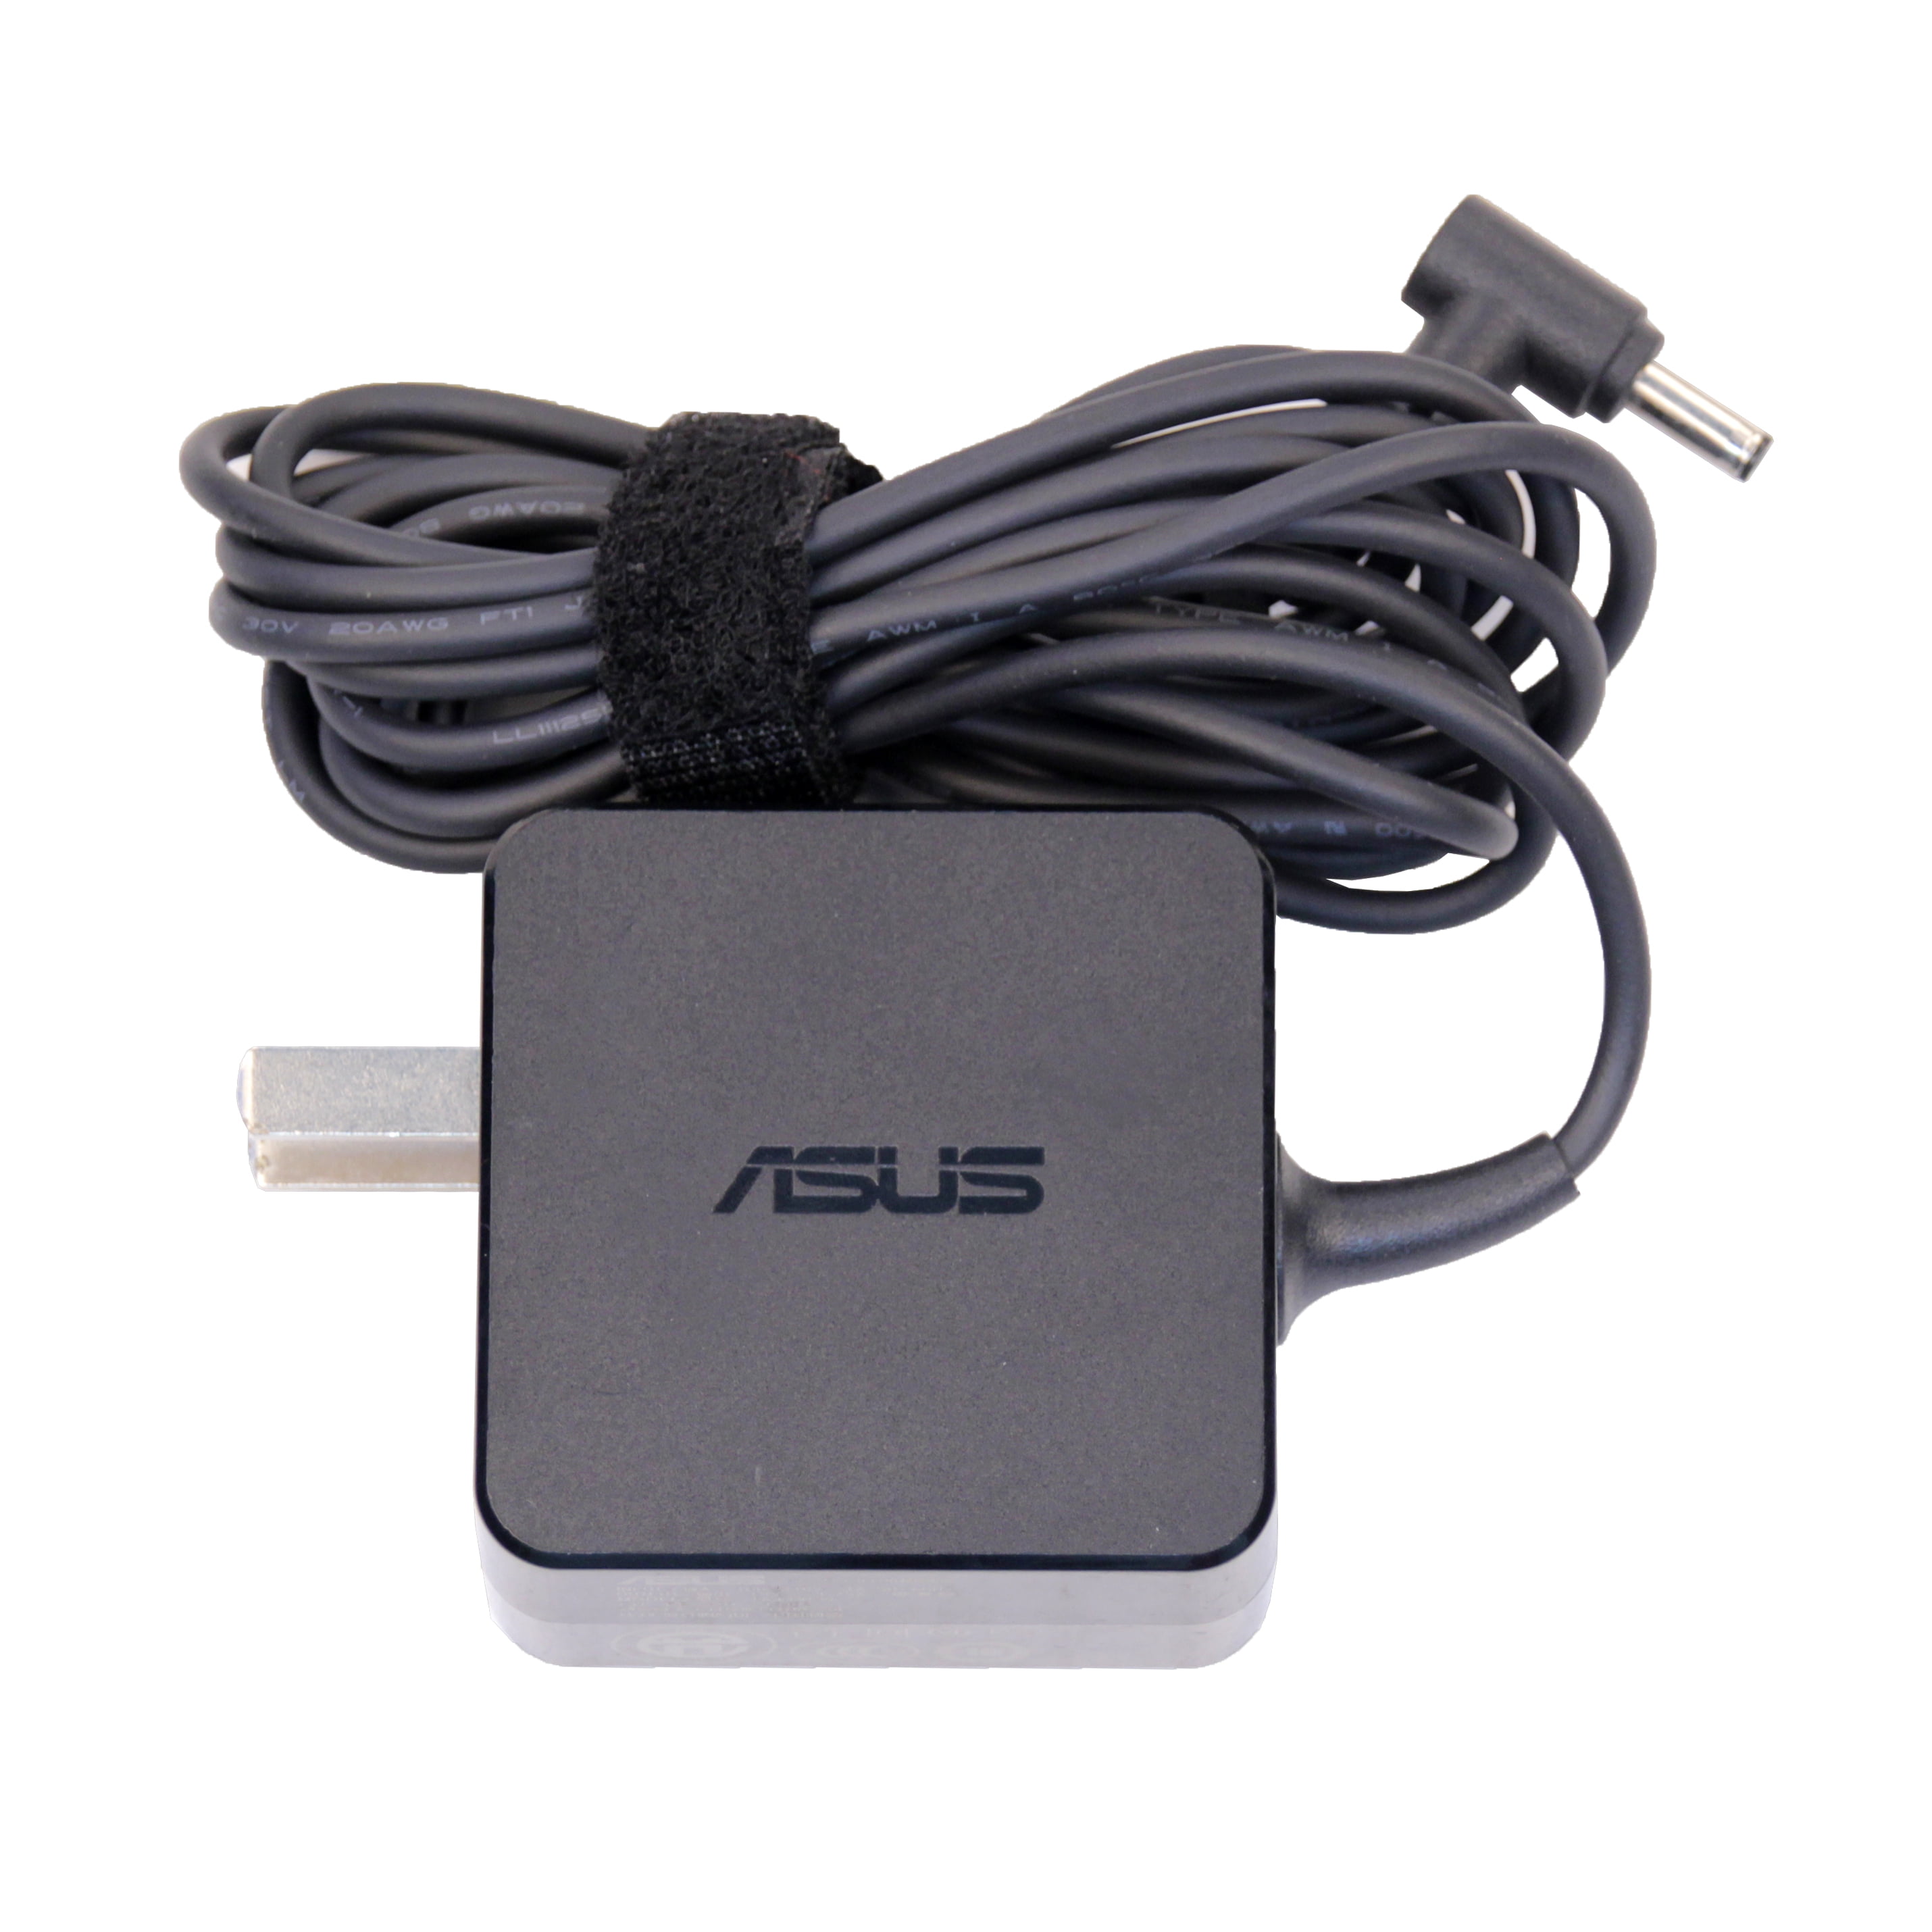 Genuine Original Asus Laptop Notebook 33W Ac Adapter Power Cable Charger for 